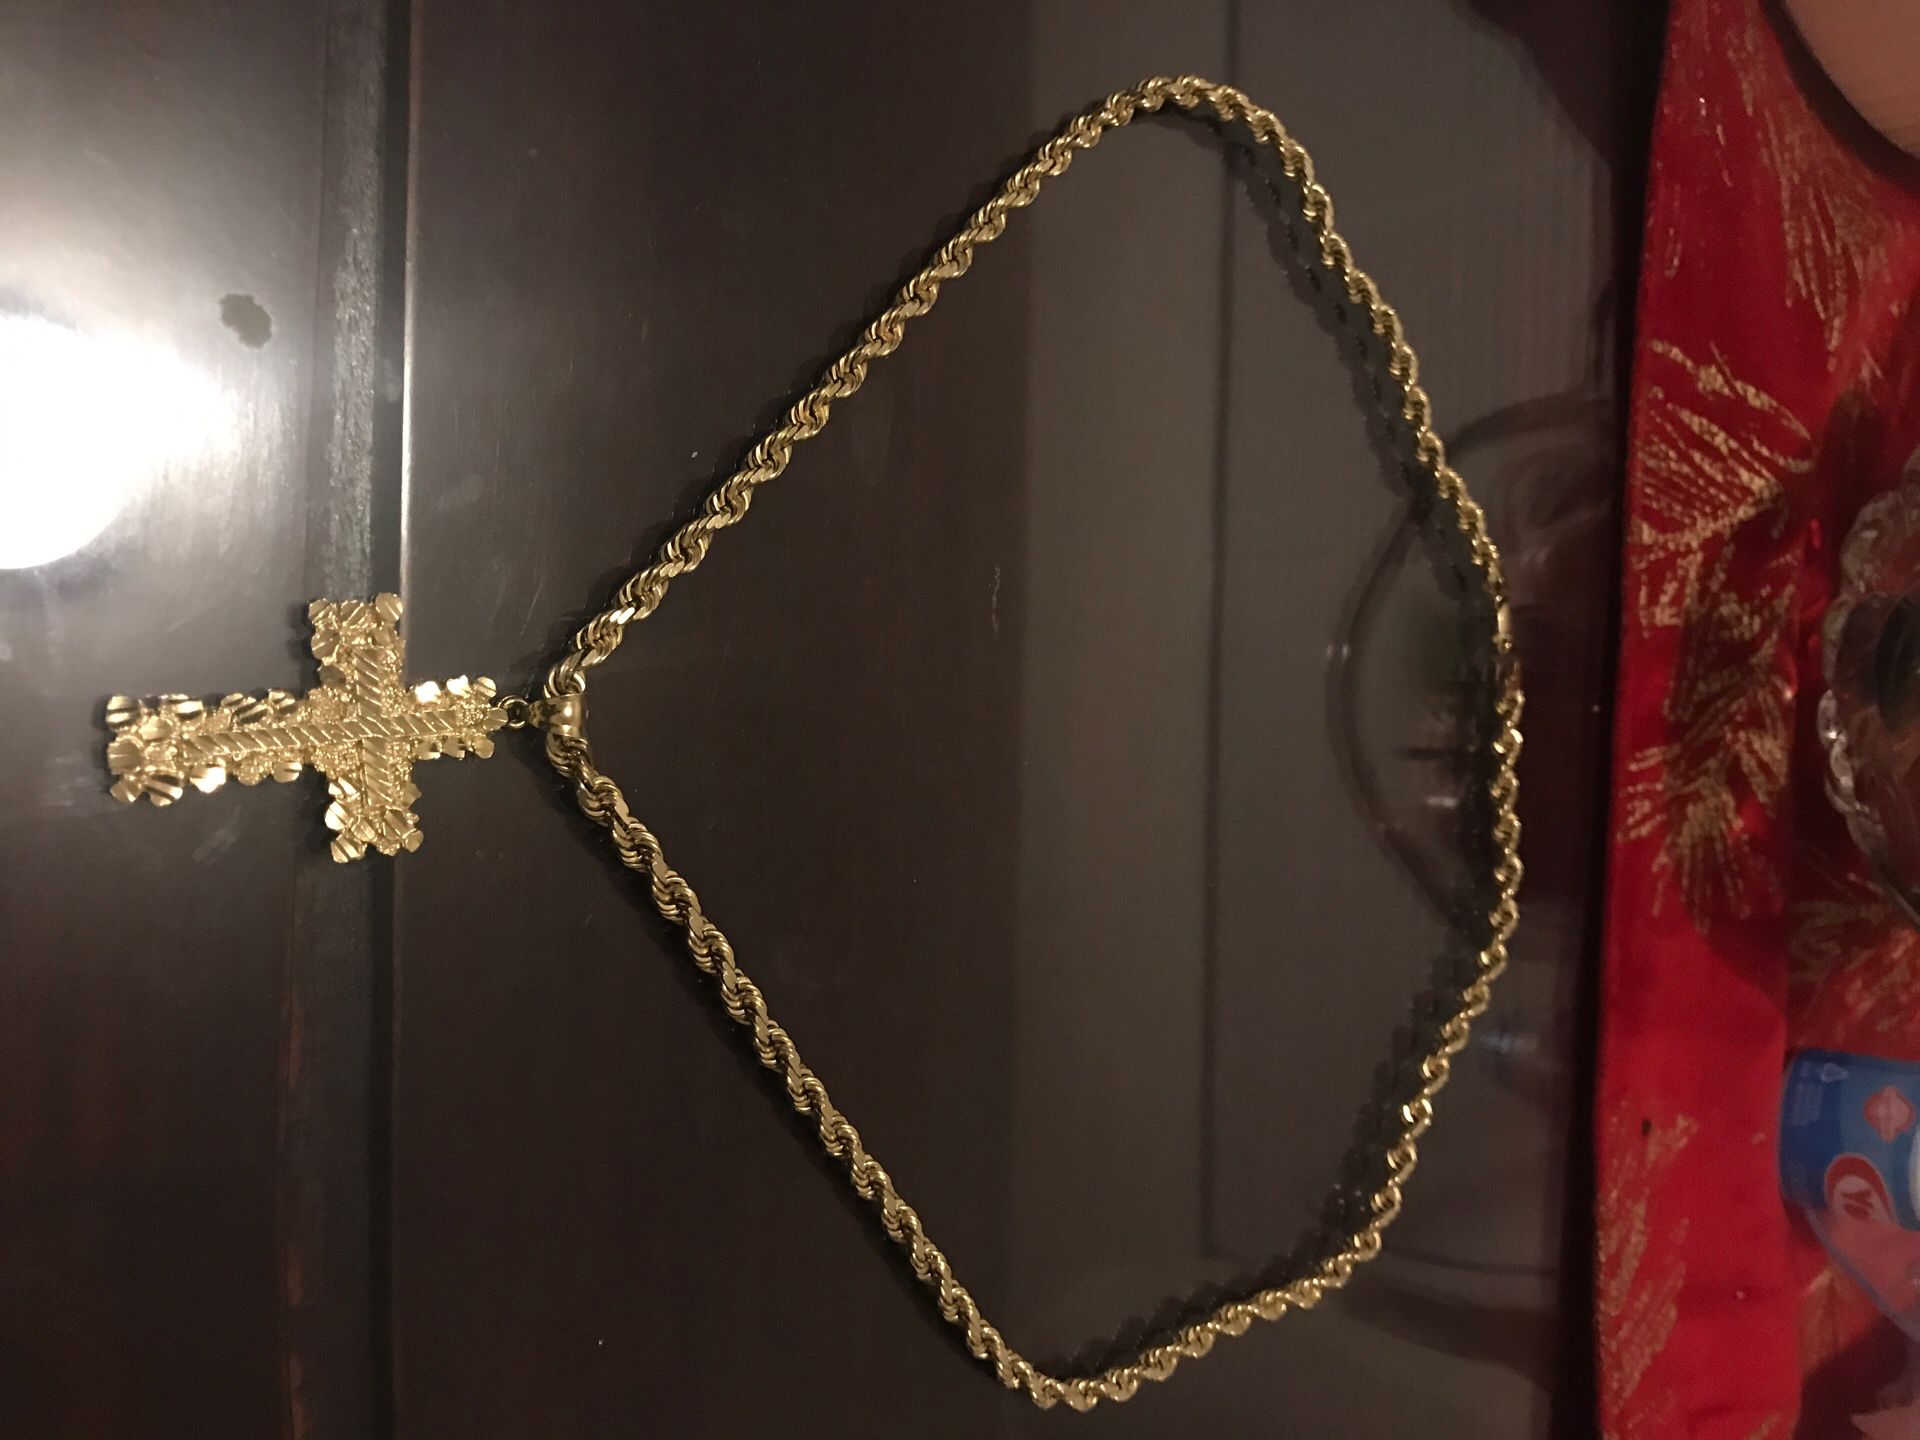 Necklace yellow 14k Gold with 14K Gold Cross pendant